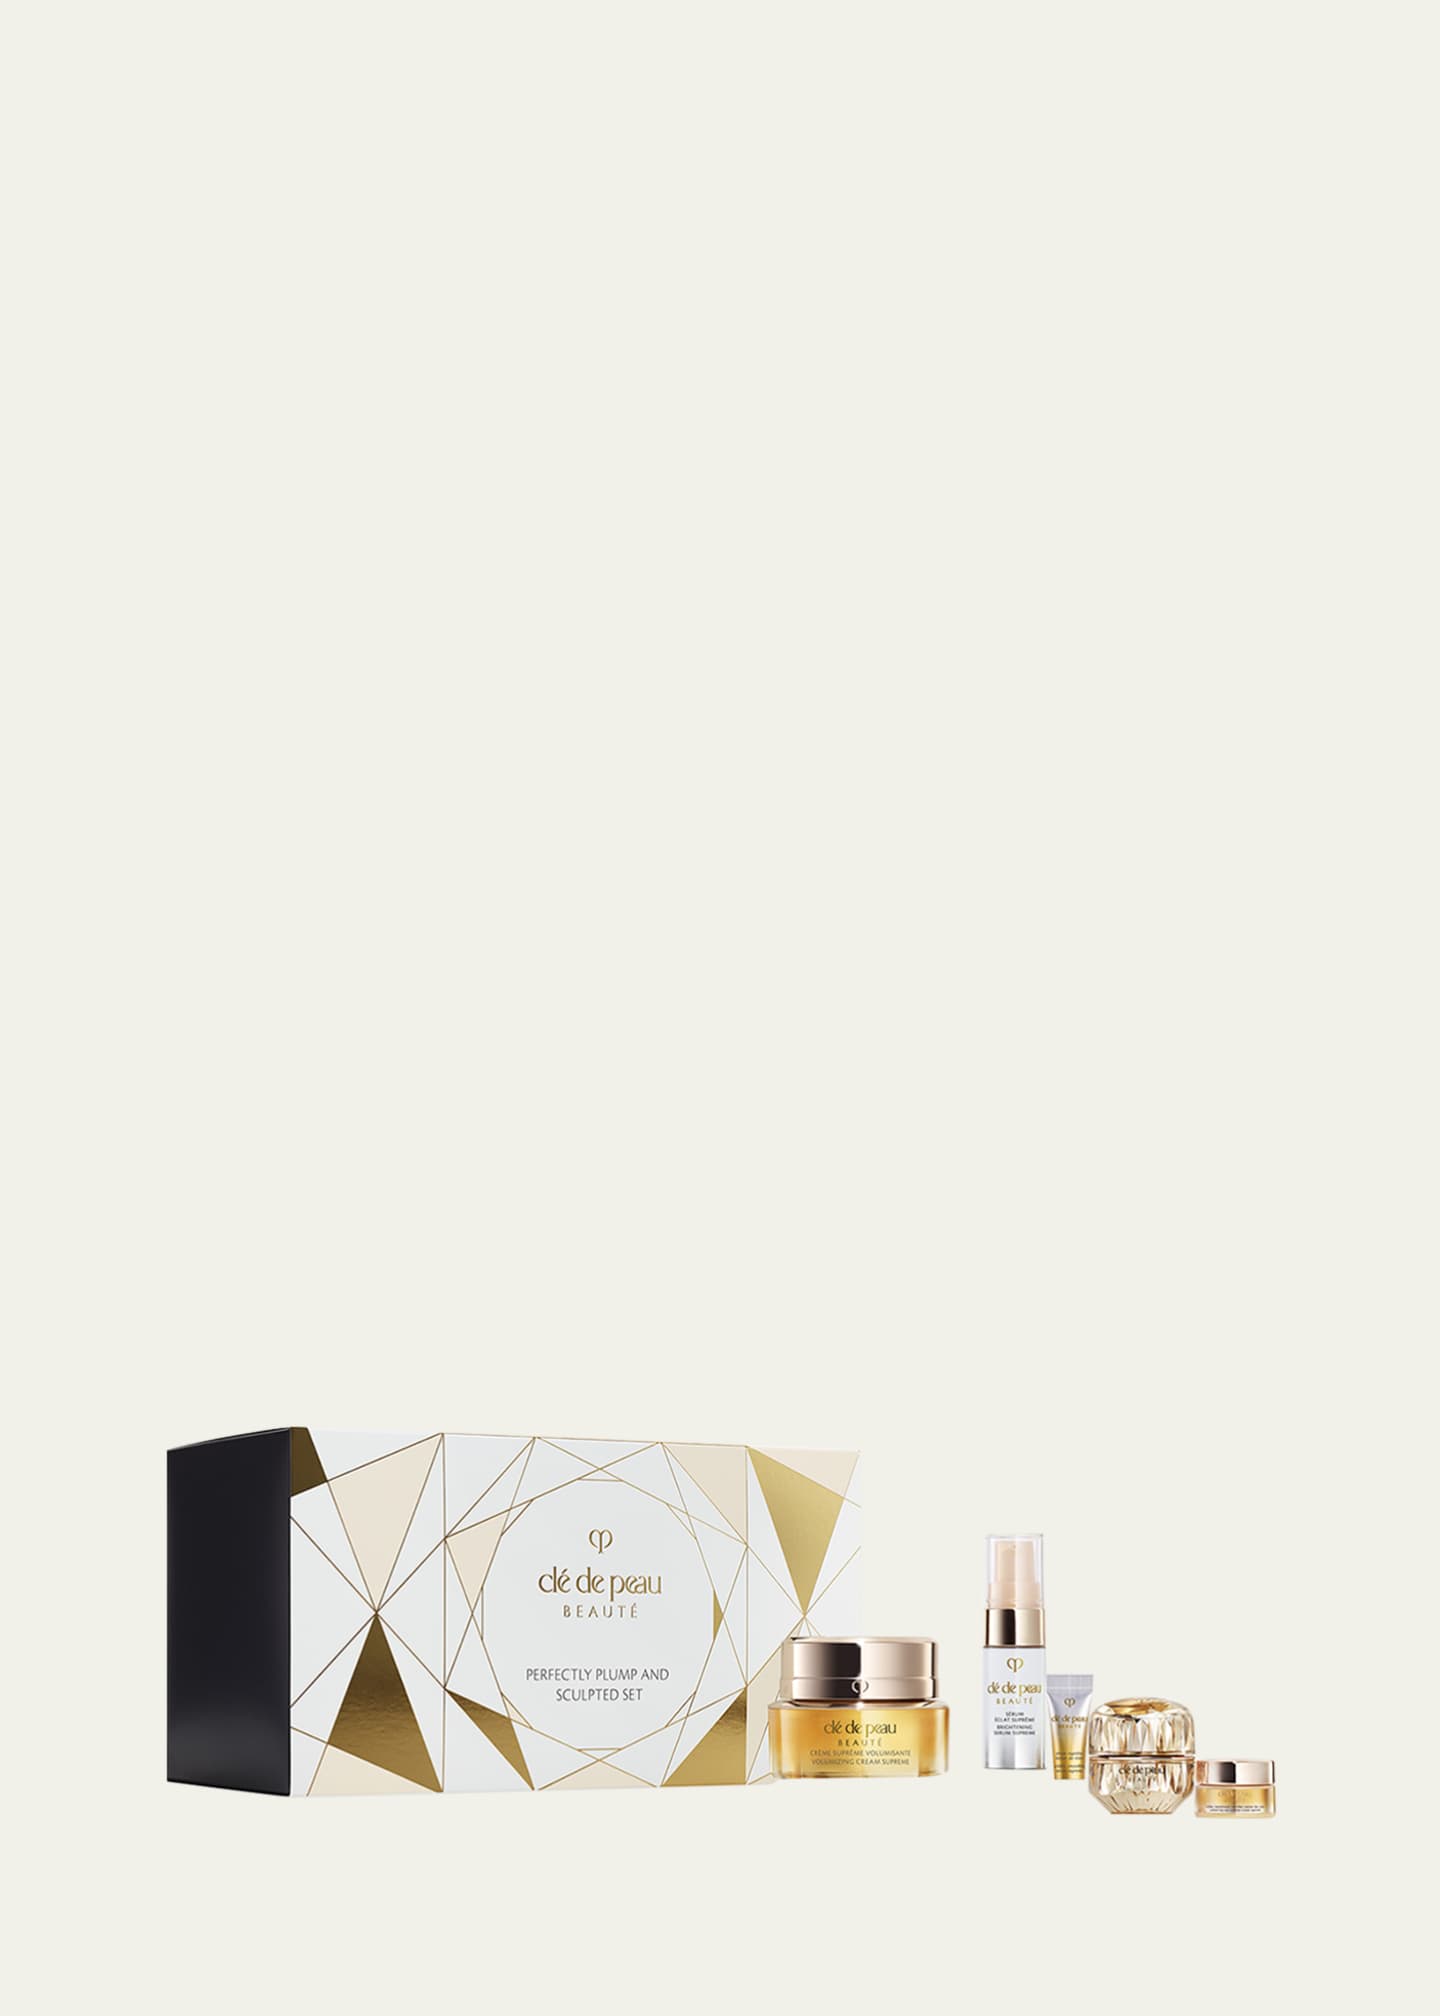 Cle de Peau Beaute Limited Edition Exclusive Perfectly Plump and Sculpted  Set ($641 Value) - Bergdorf Goodman